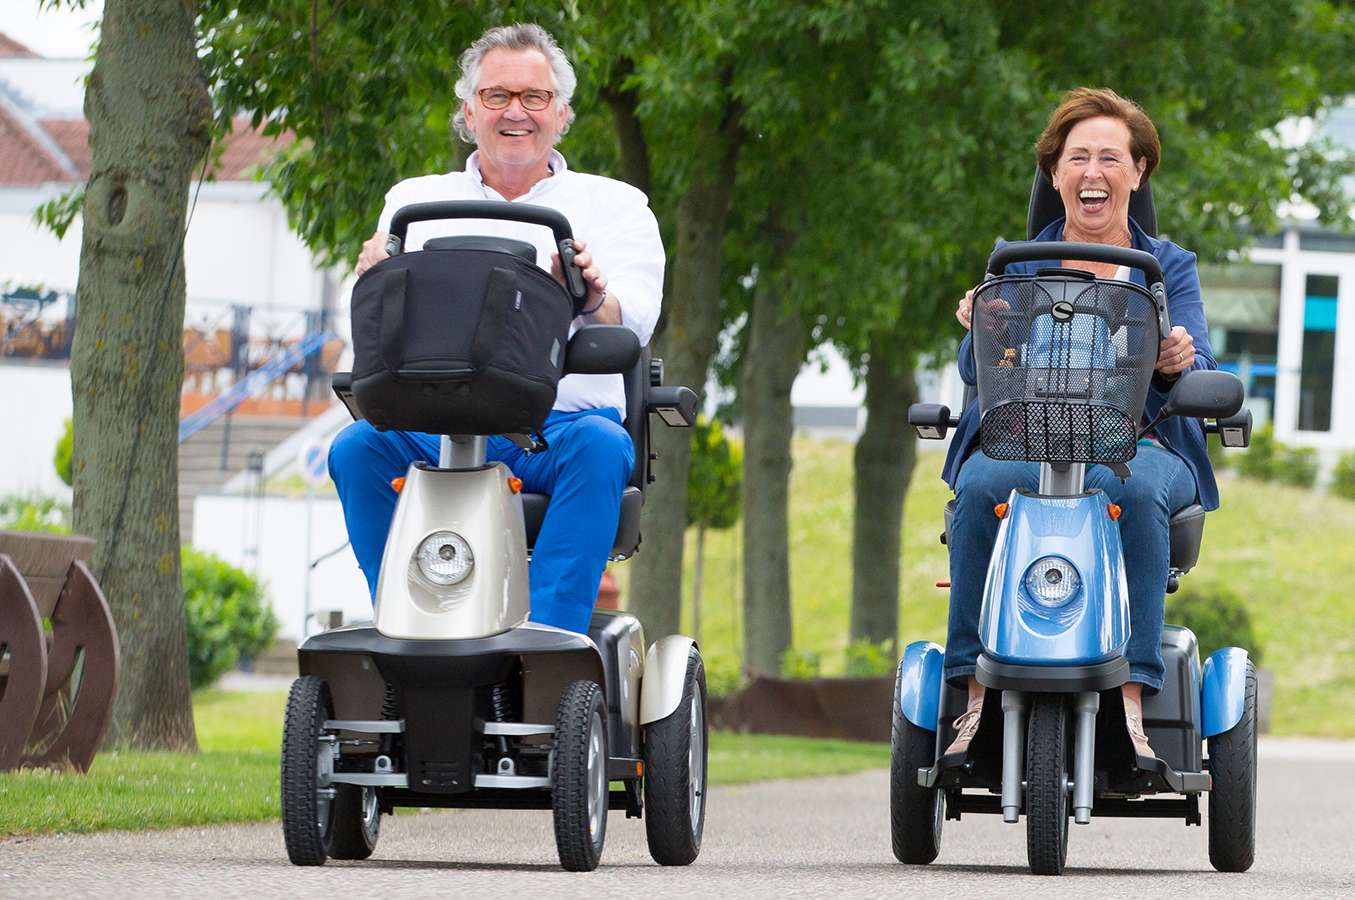 A couple out driving mobility scooters to test how they feel.